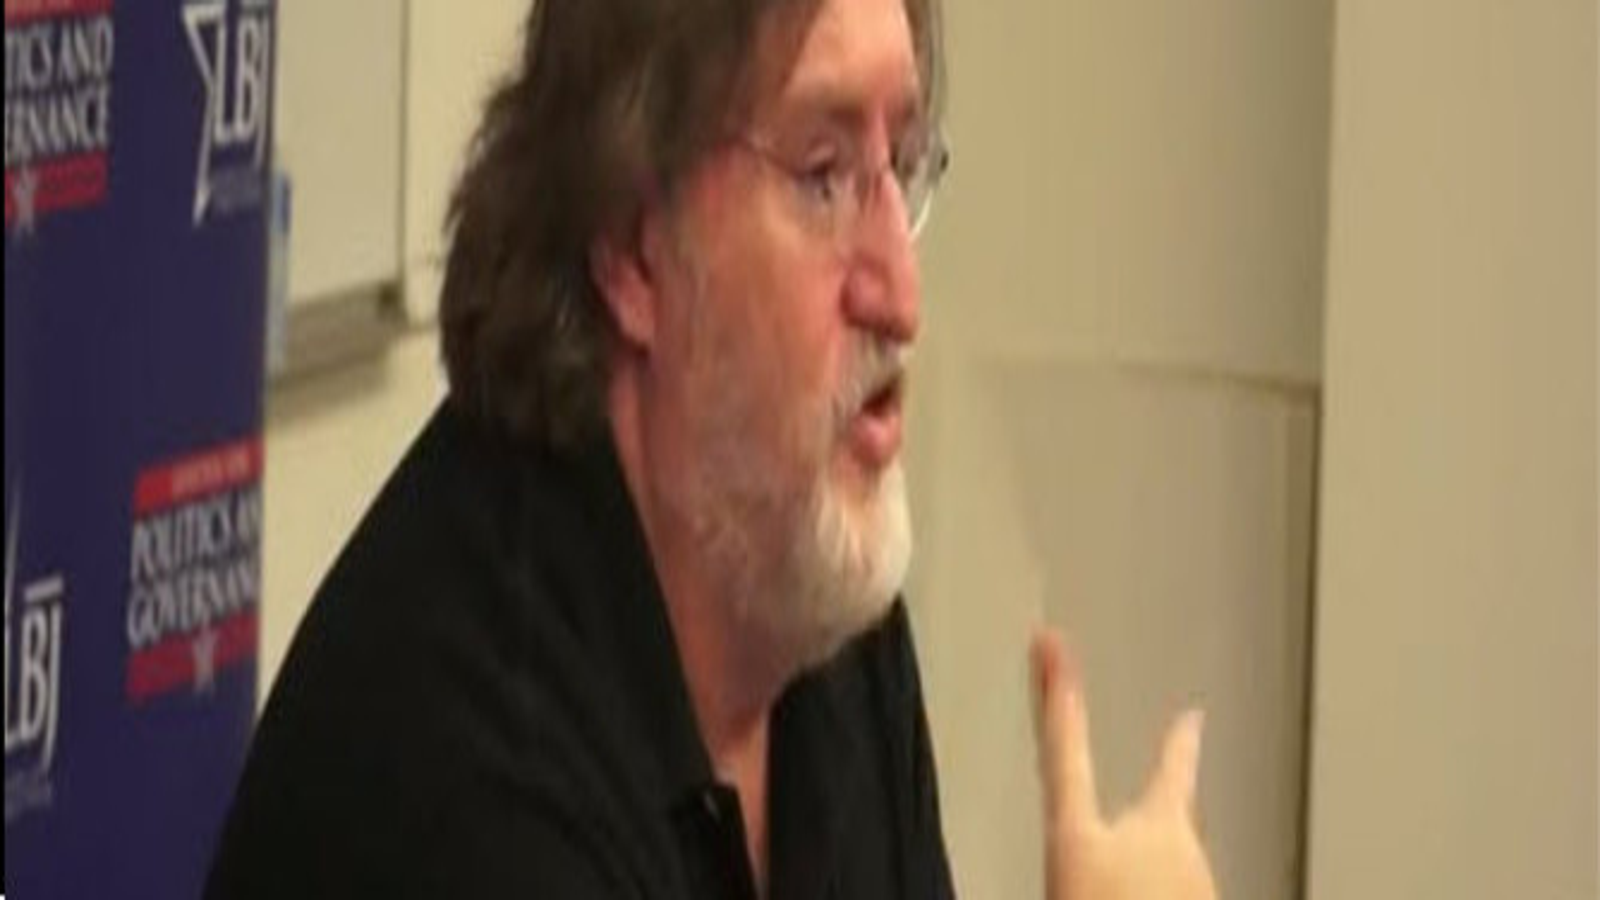 Valve's Gabe Newell to receive BAFTA Fellowship snazzy award thing